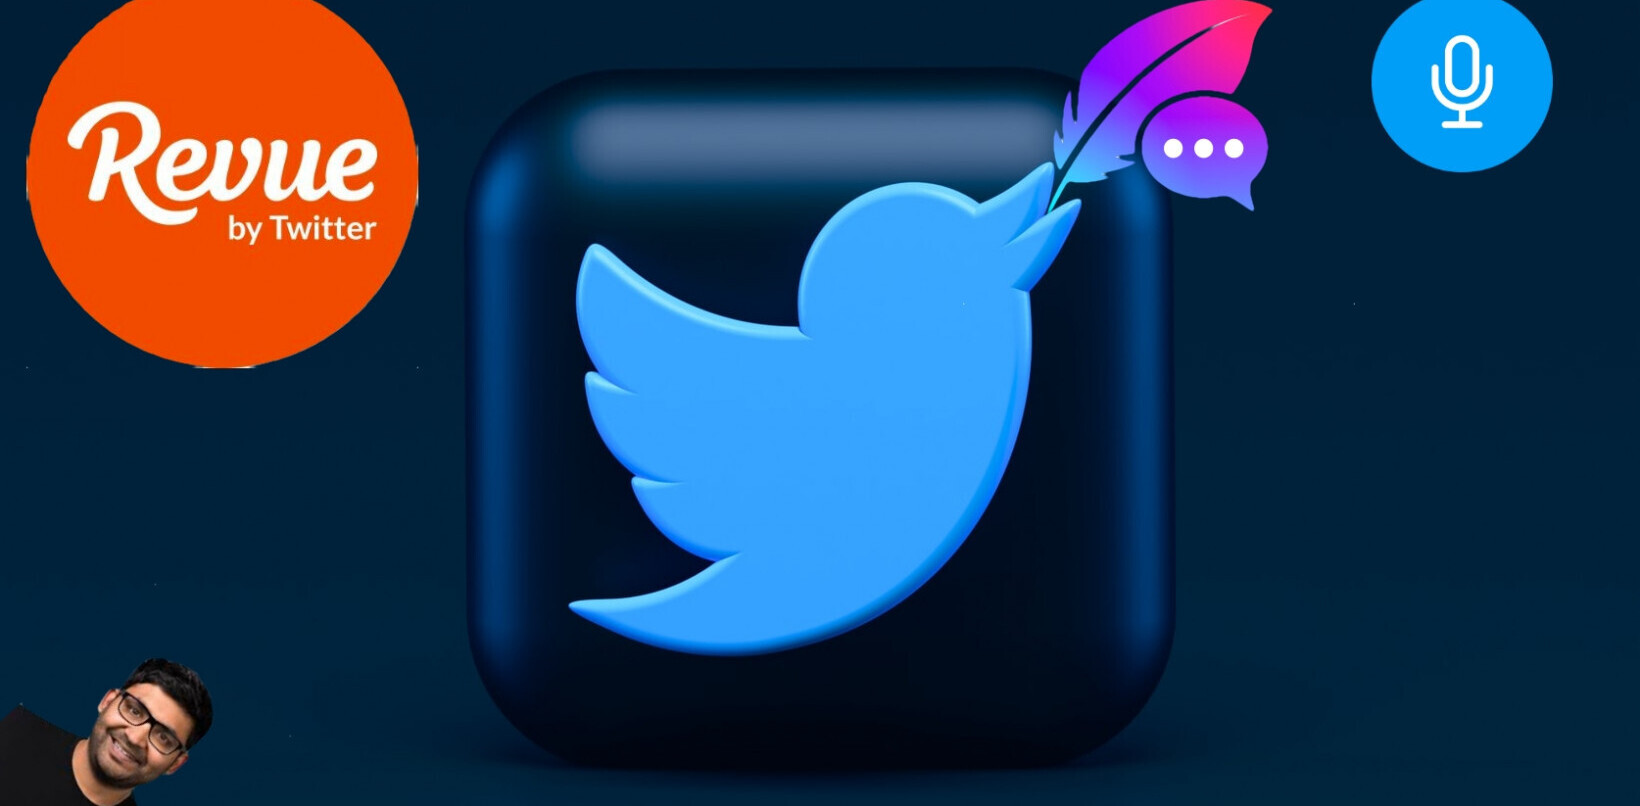 Twitter’s 7 acquisitions in 2021 show its ambition to move beyond the live feed